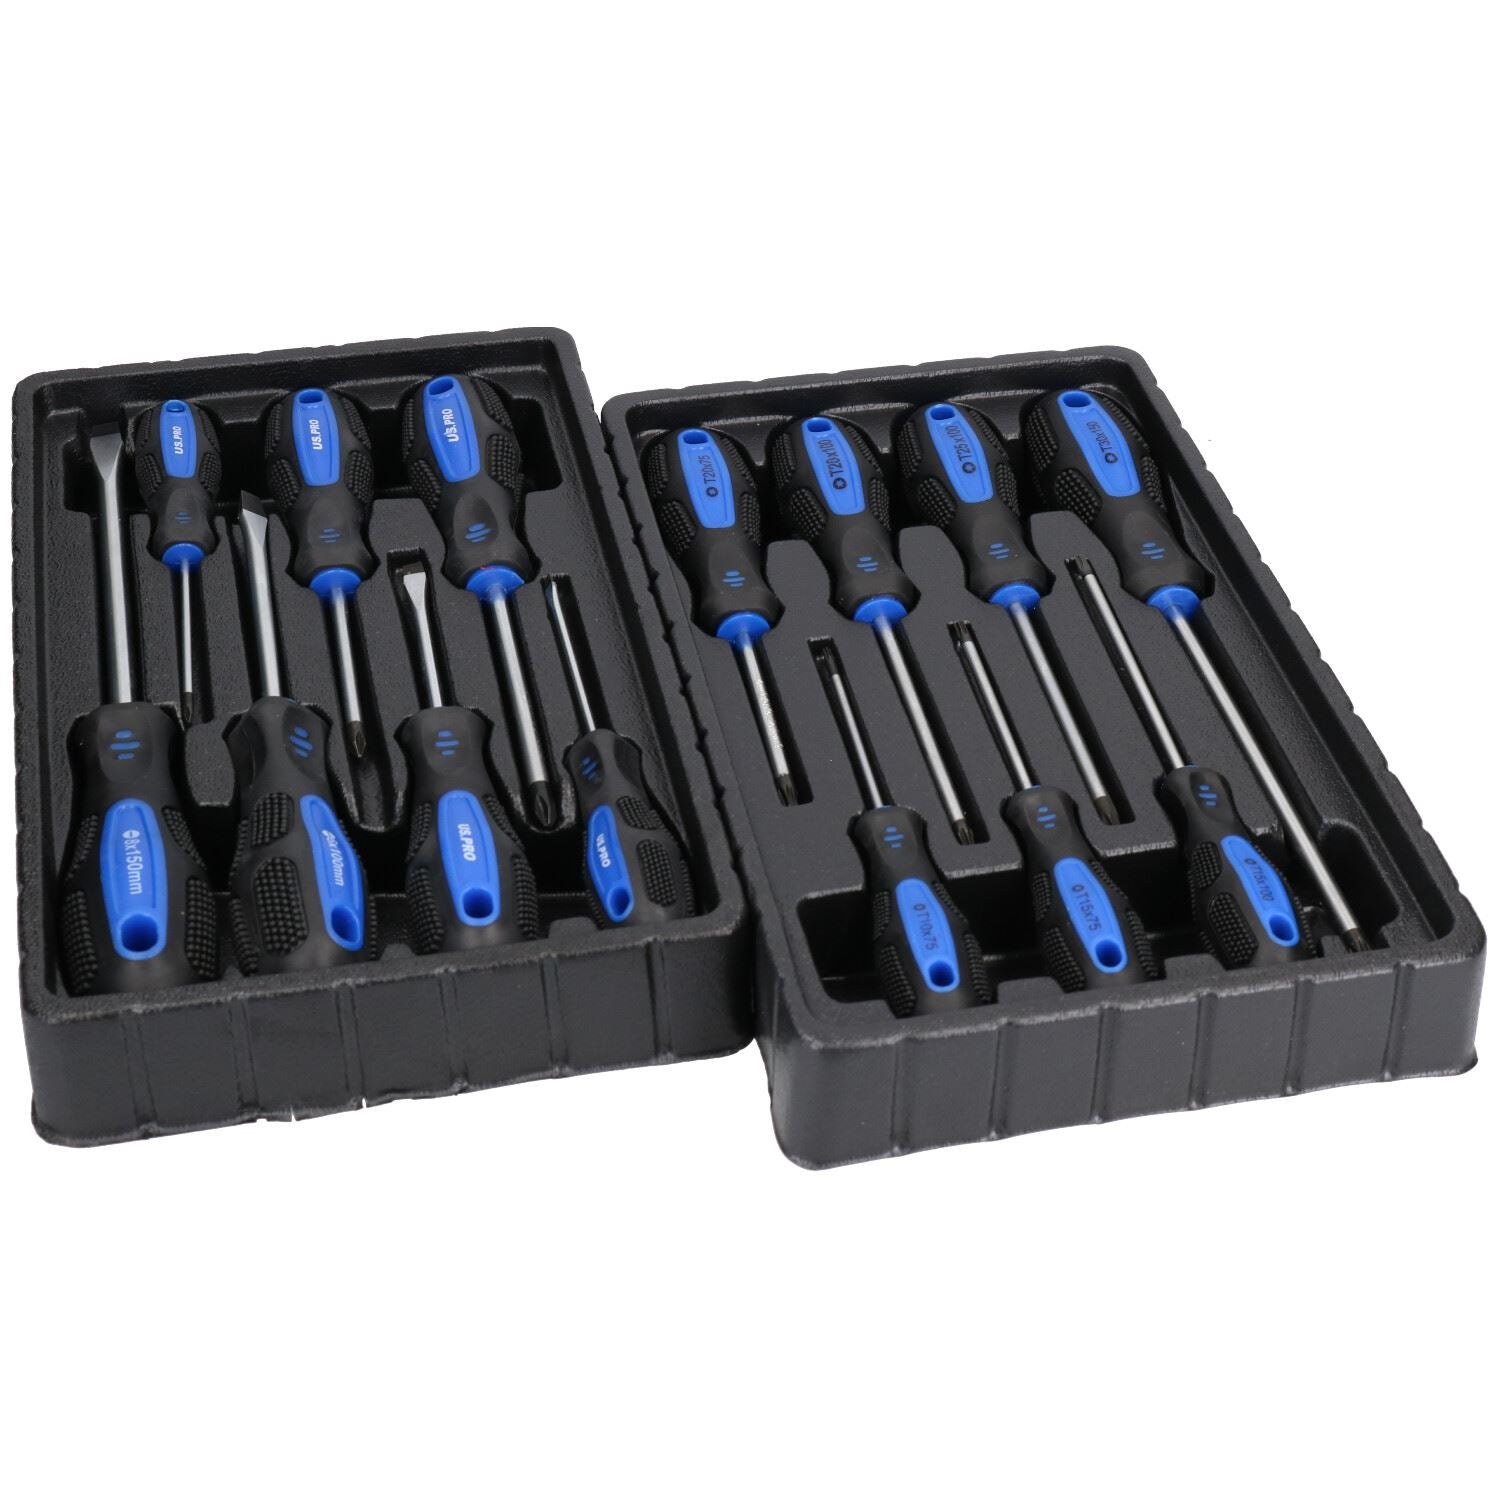 Phillips Flat Headed and Torx Screwdriver Set Magnetic Tips Cushioned Grip 14pc